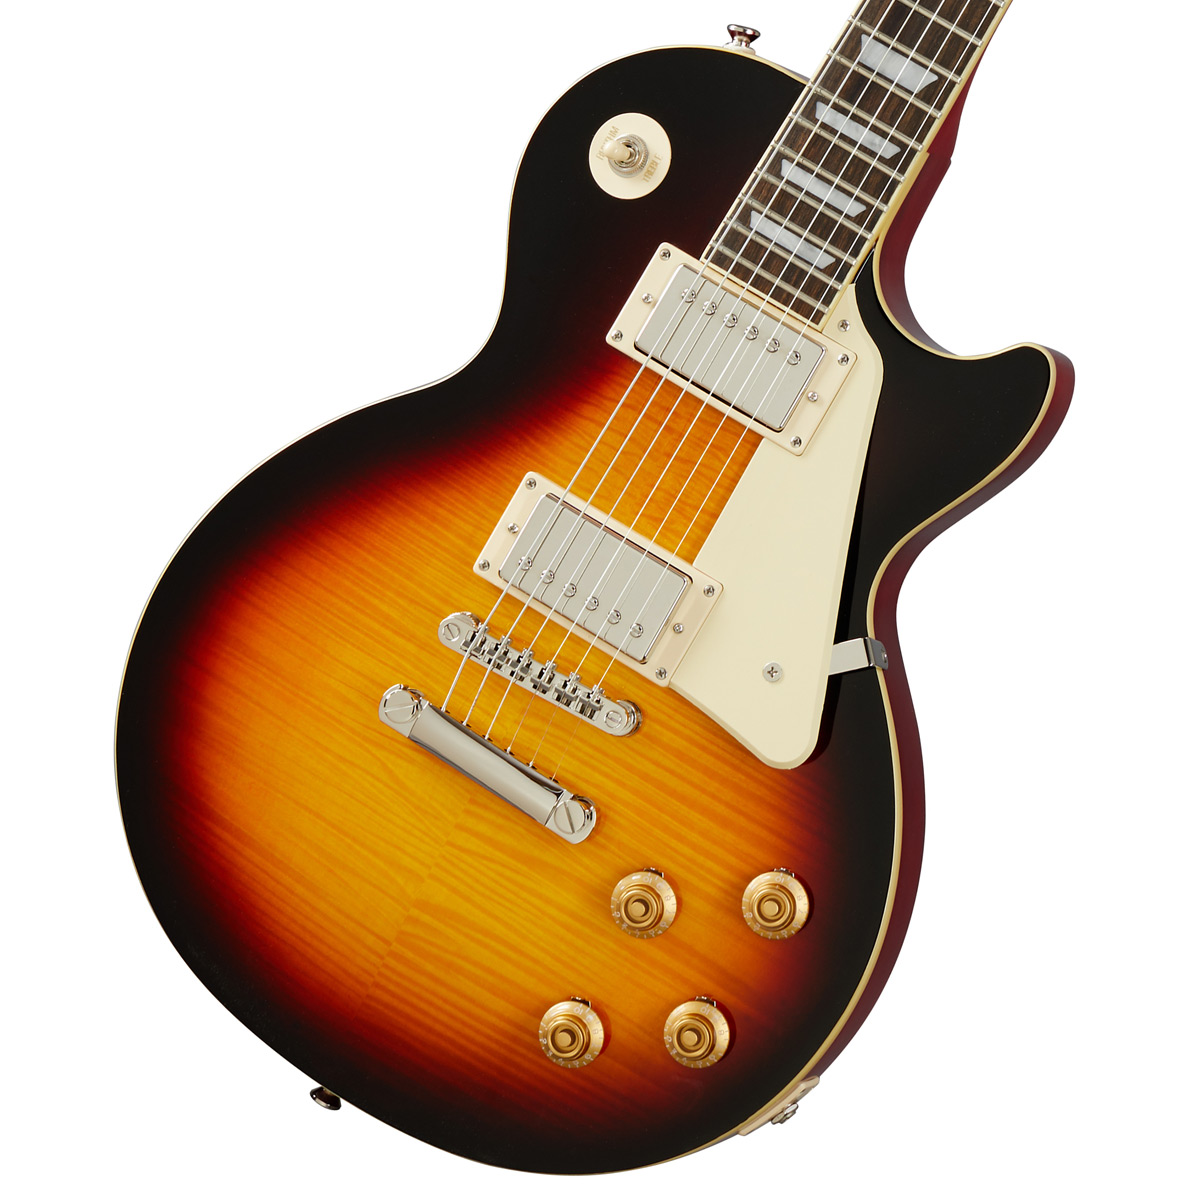 Epiphone / Inspired by Gibson Les Paul Standard 50s Vintage Sunburst エレキギター  レスポール スタンダード